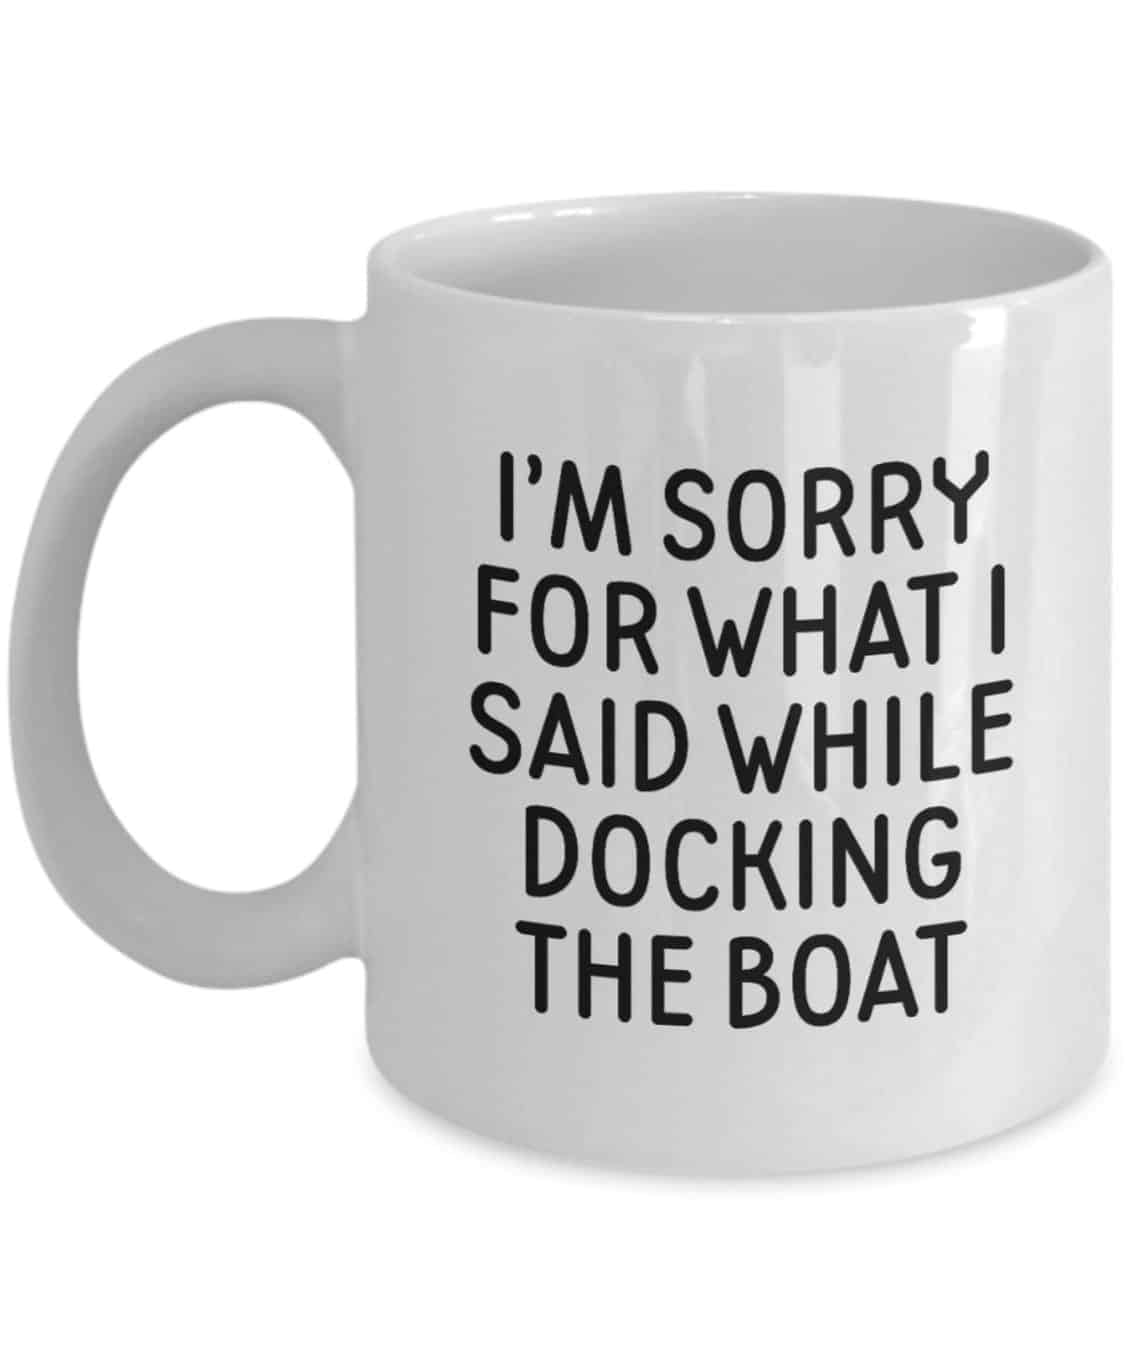 Quirky Mug for a Boating Enthusiast